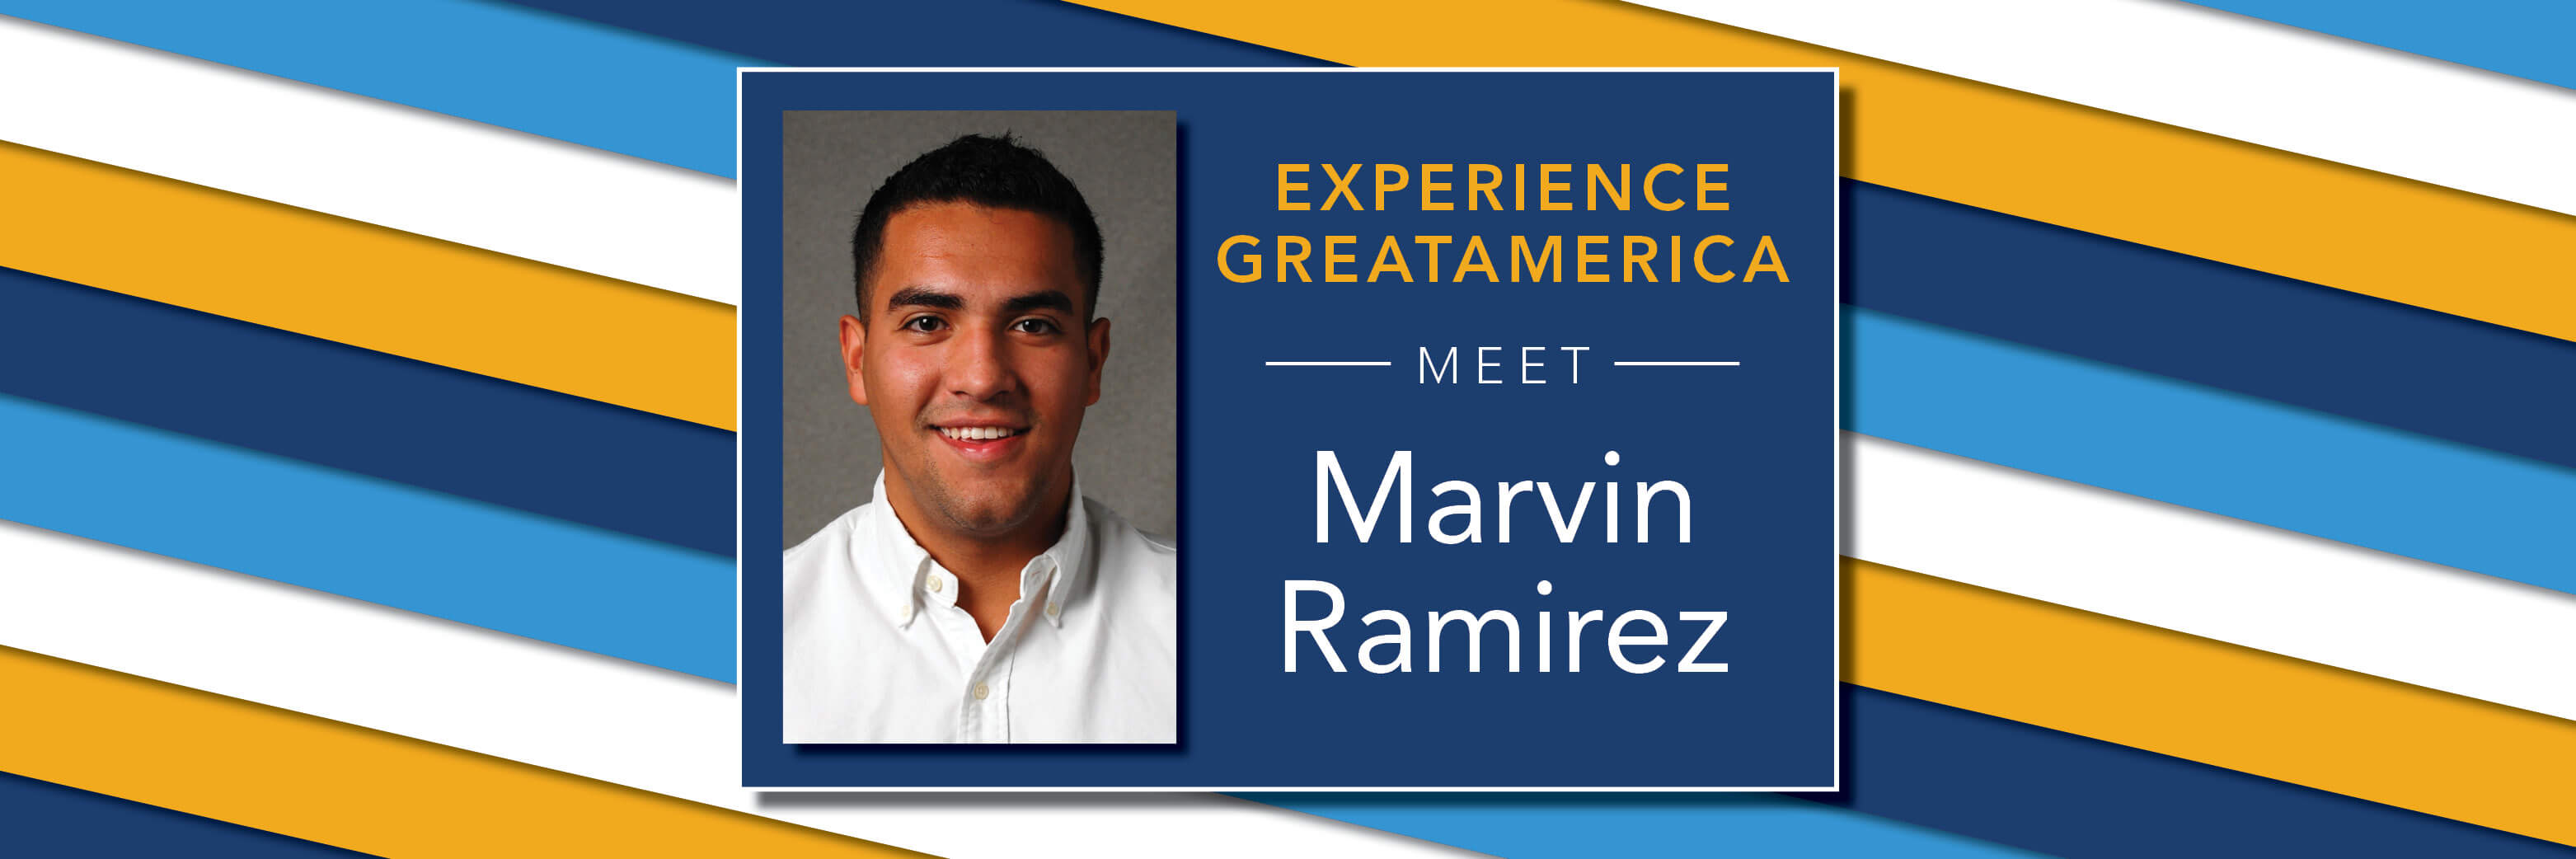 Experience GreatAmerica with Sales Support Specialist - Marvin Ramirez